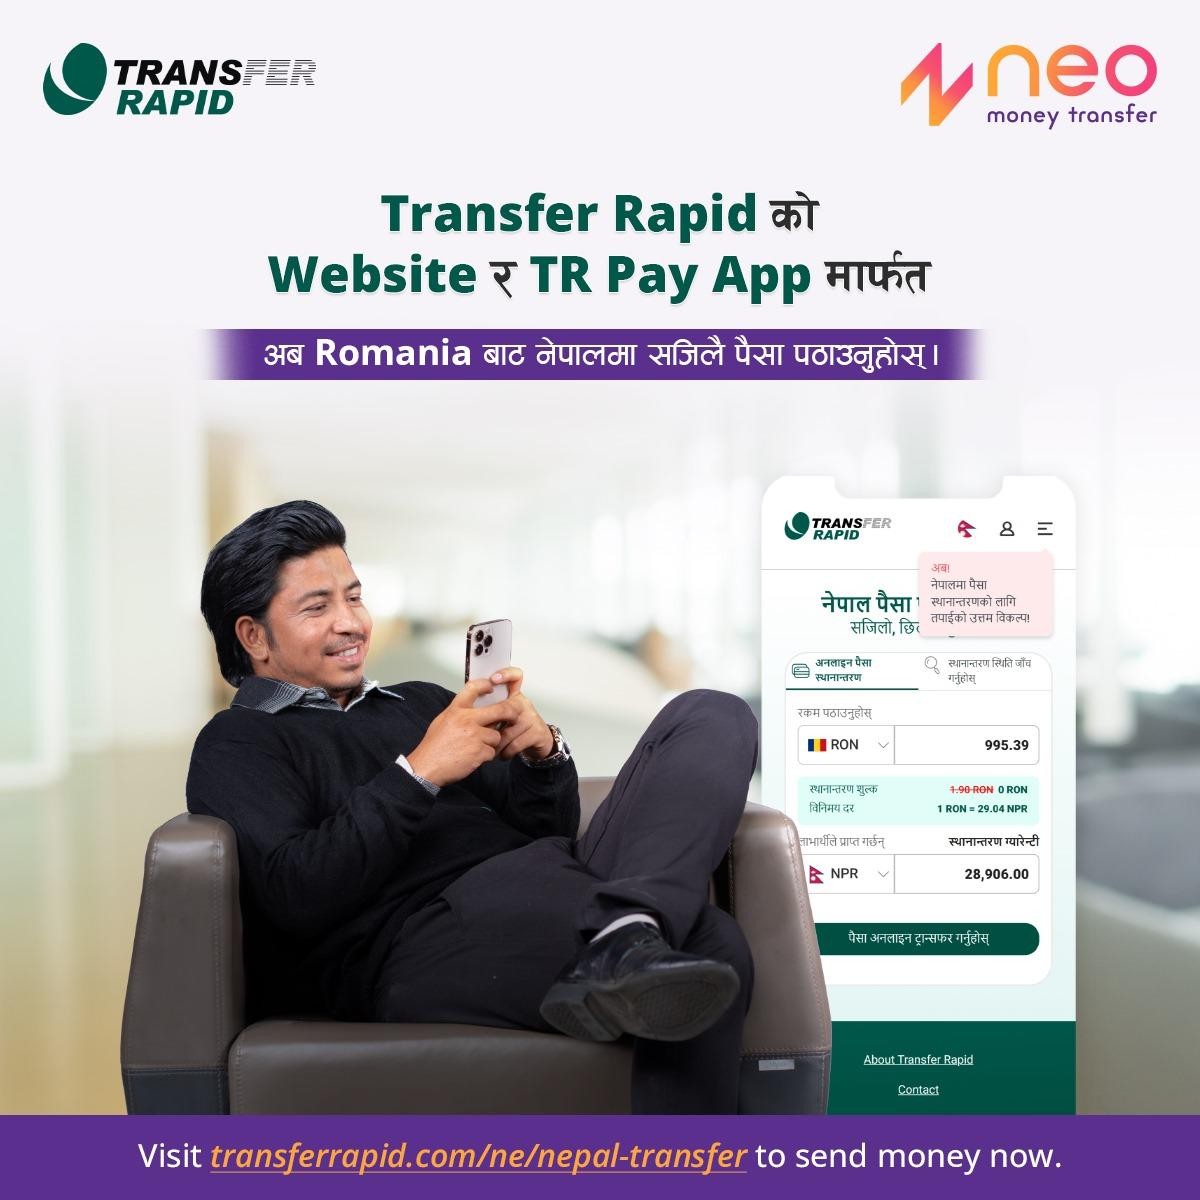 Neo Money Transfer partners with Transfer Rapid enabling new remittance corridor from Romania to Nepal